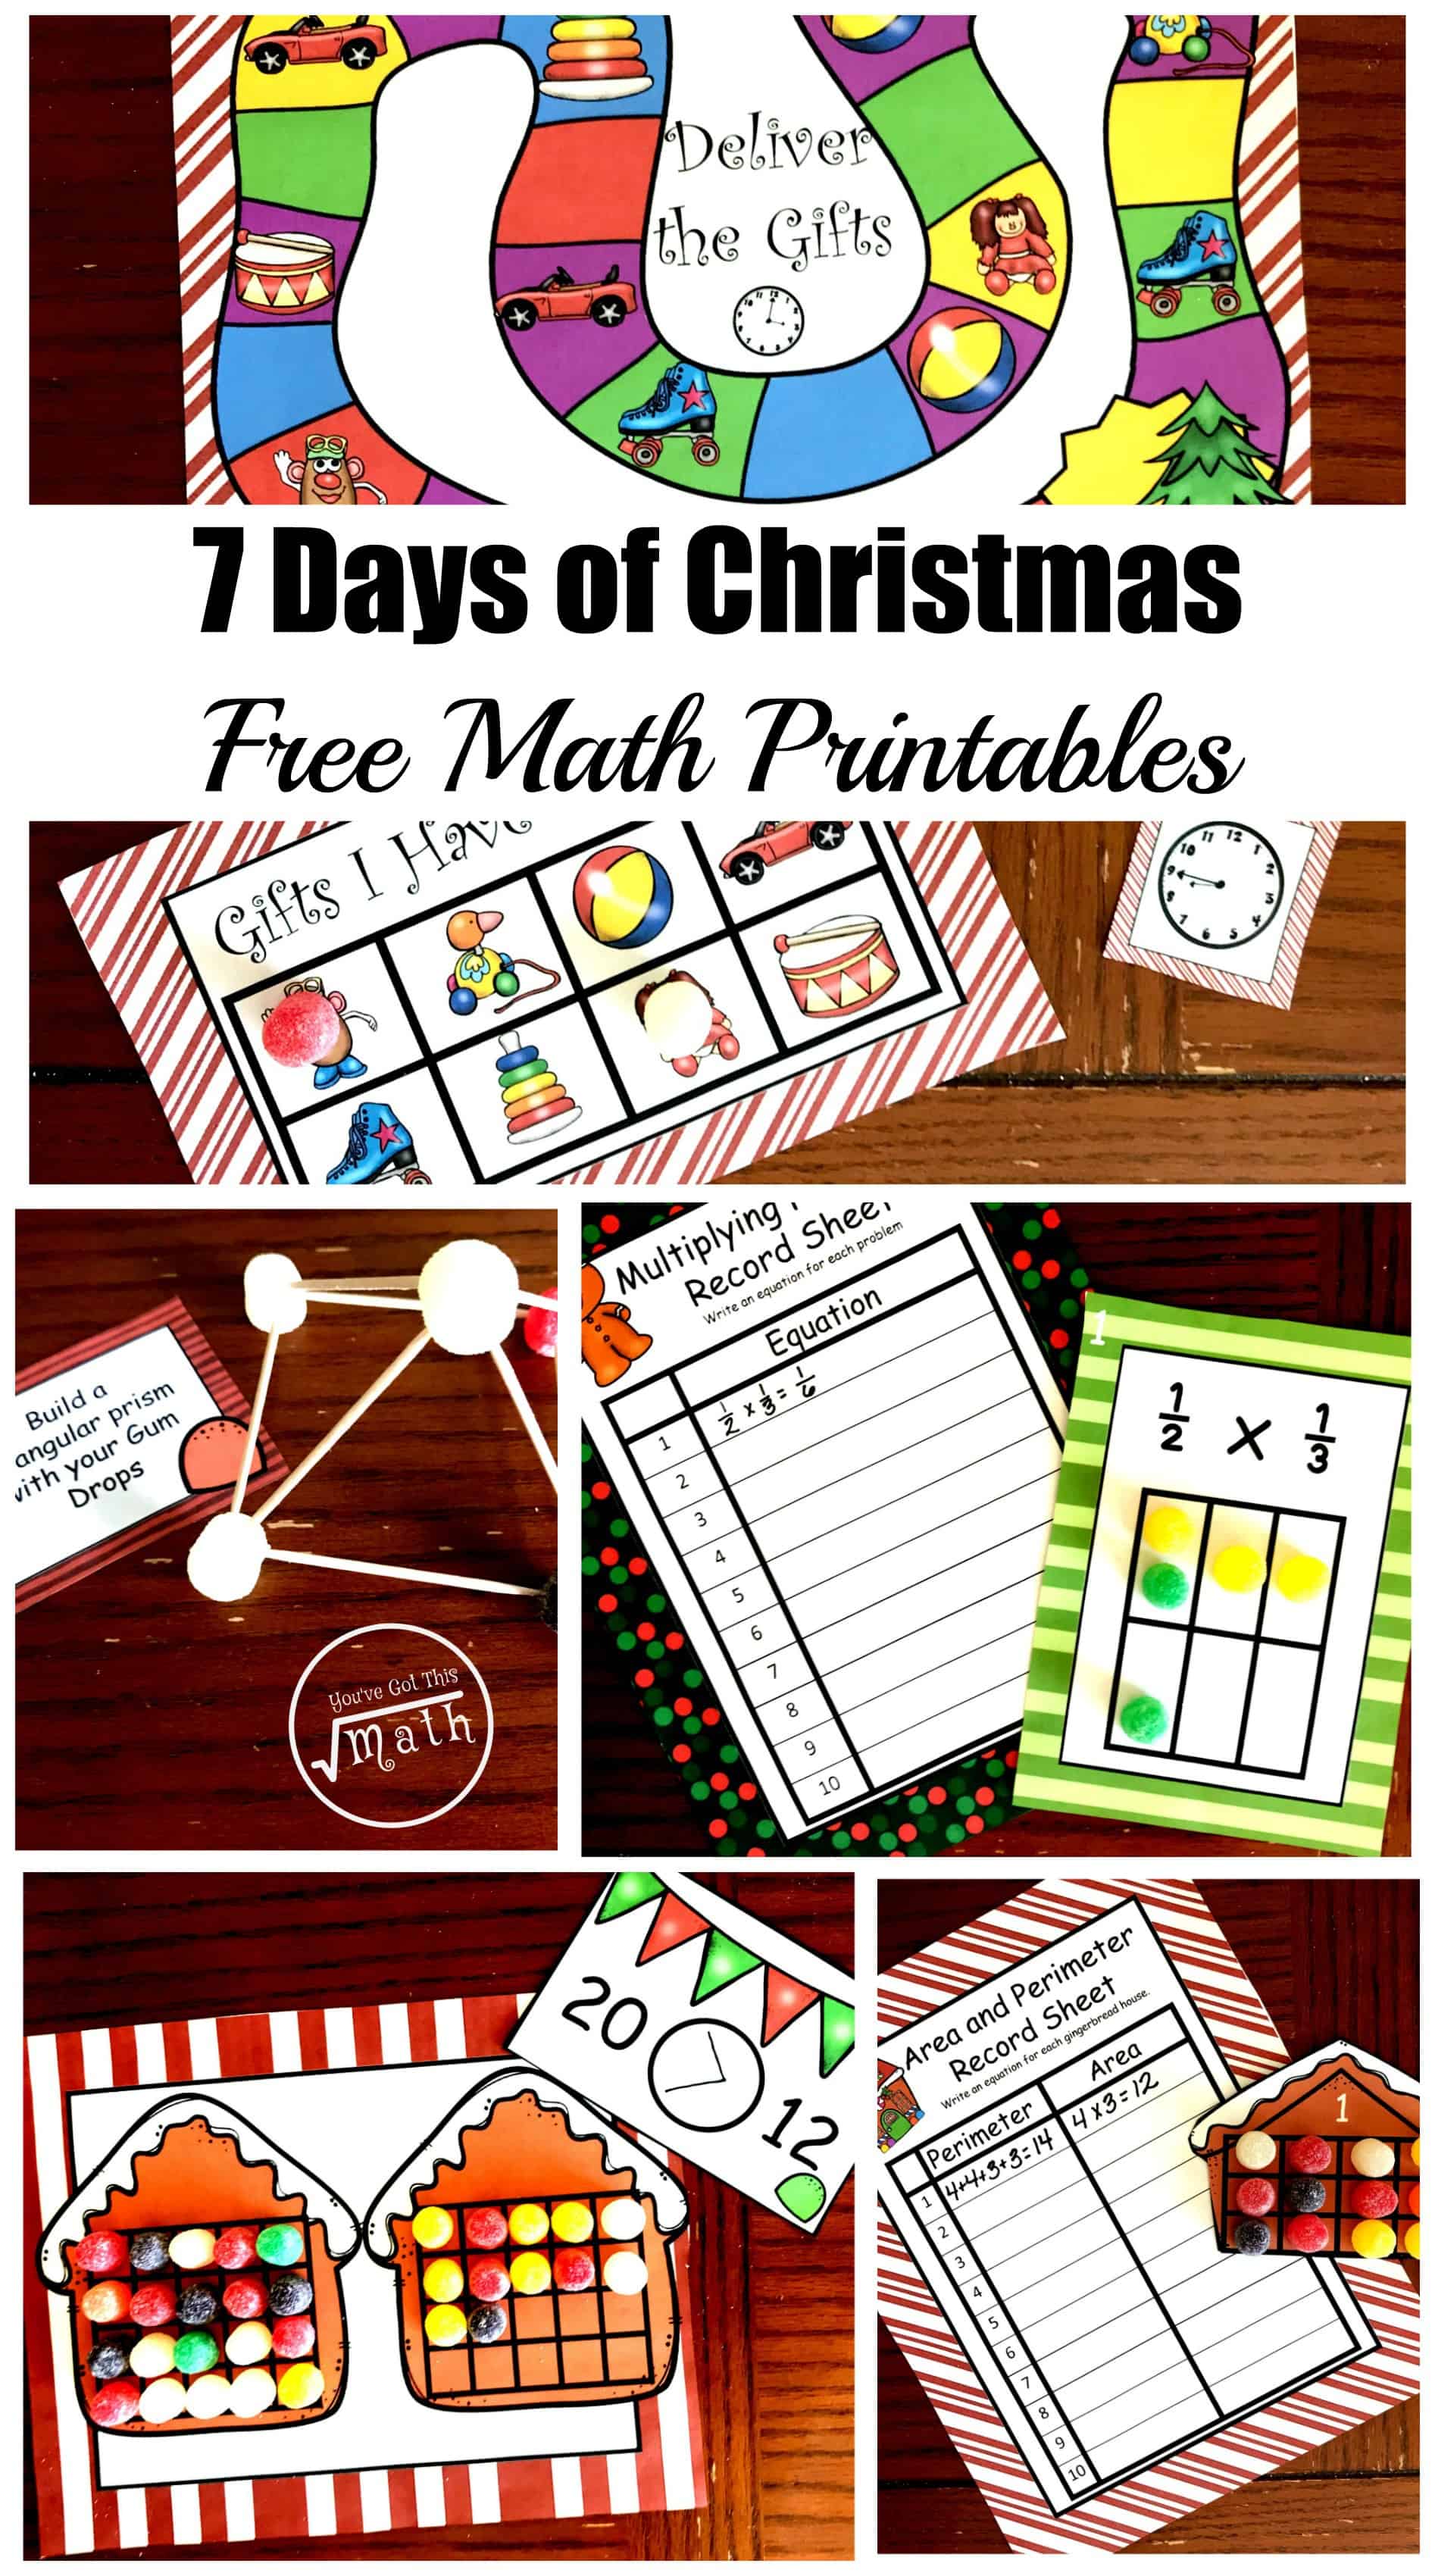 I want to say Merry Christmas to you by providing you with 7 days of free Christmas Math Printables for kindergarten through fifth grade.